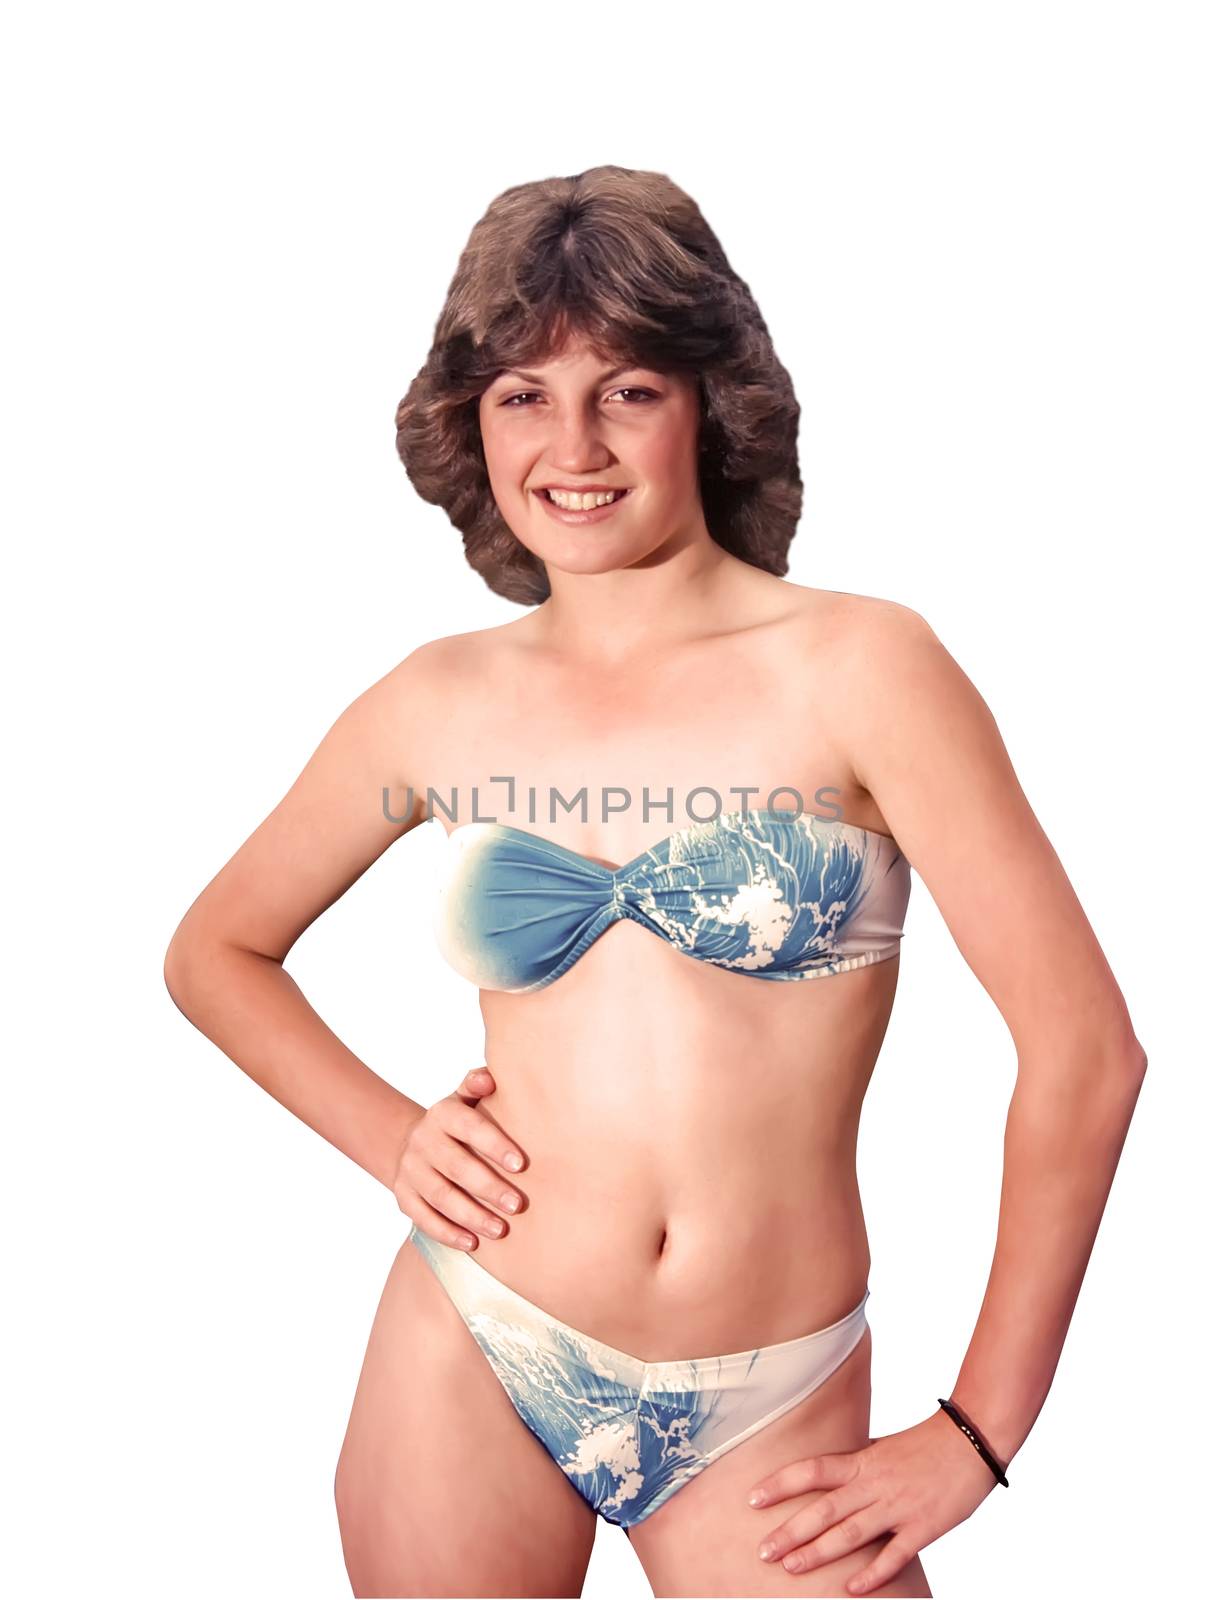 Teenage girl with brown shoulder length hair wearing a fashionable blue and white two piece swimsuit, standing confidently before a white background...includes clipping path